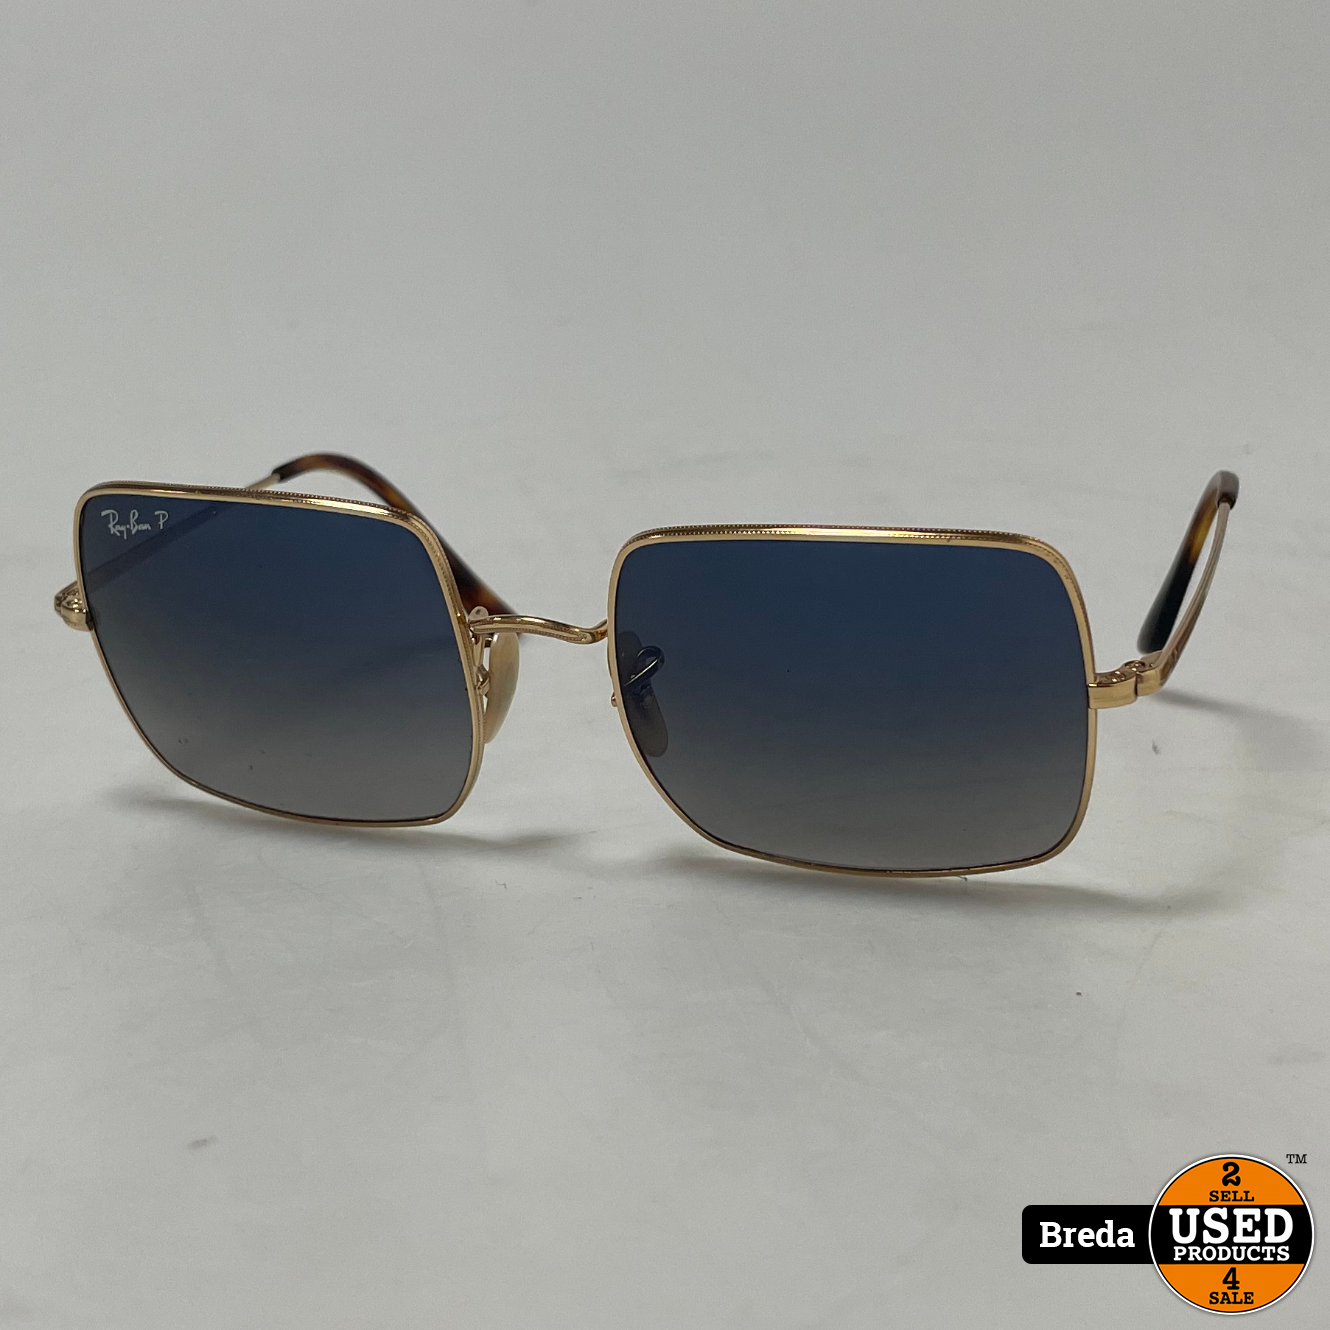 Lounge Gestreept overzee Ray-Ban RB1971 Square 9147/78 Zonnebril Goud | In hoes - Used Products Breda